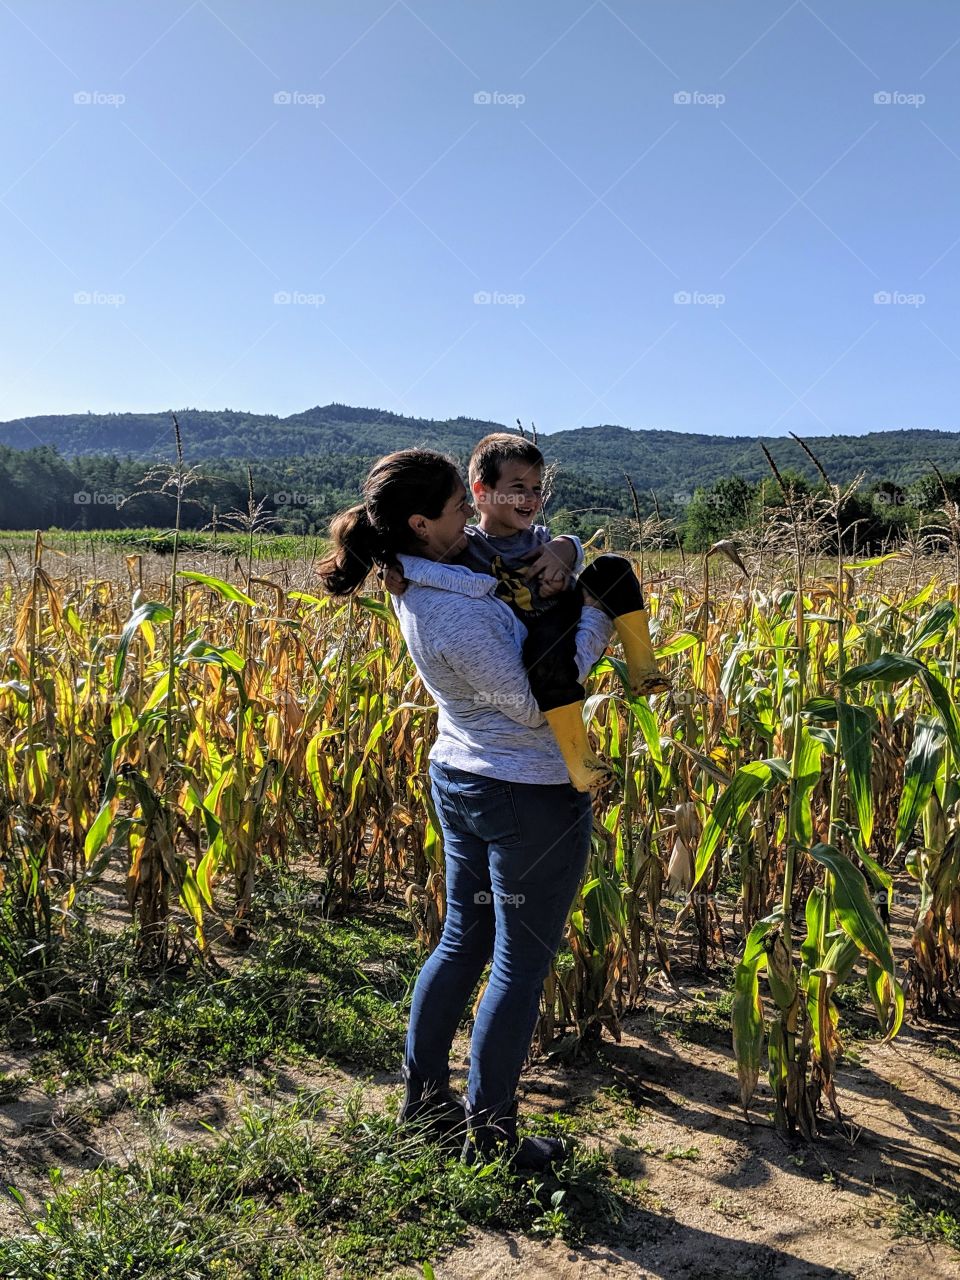 mother and son in corn field